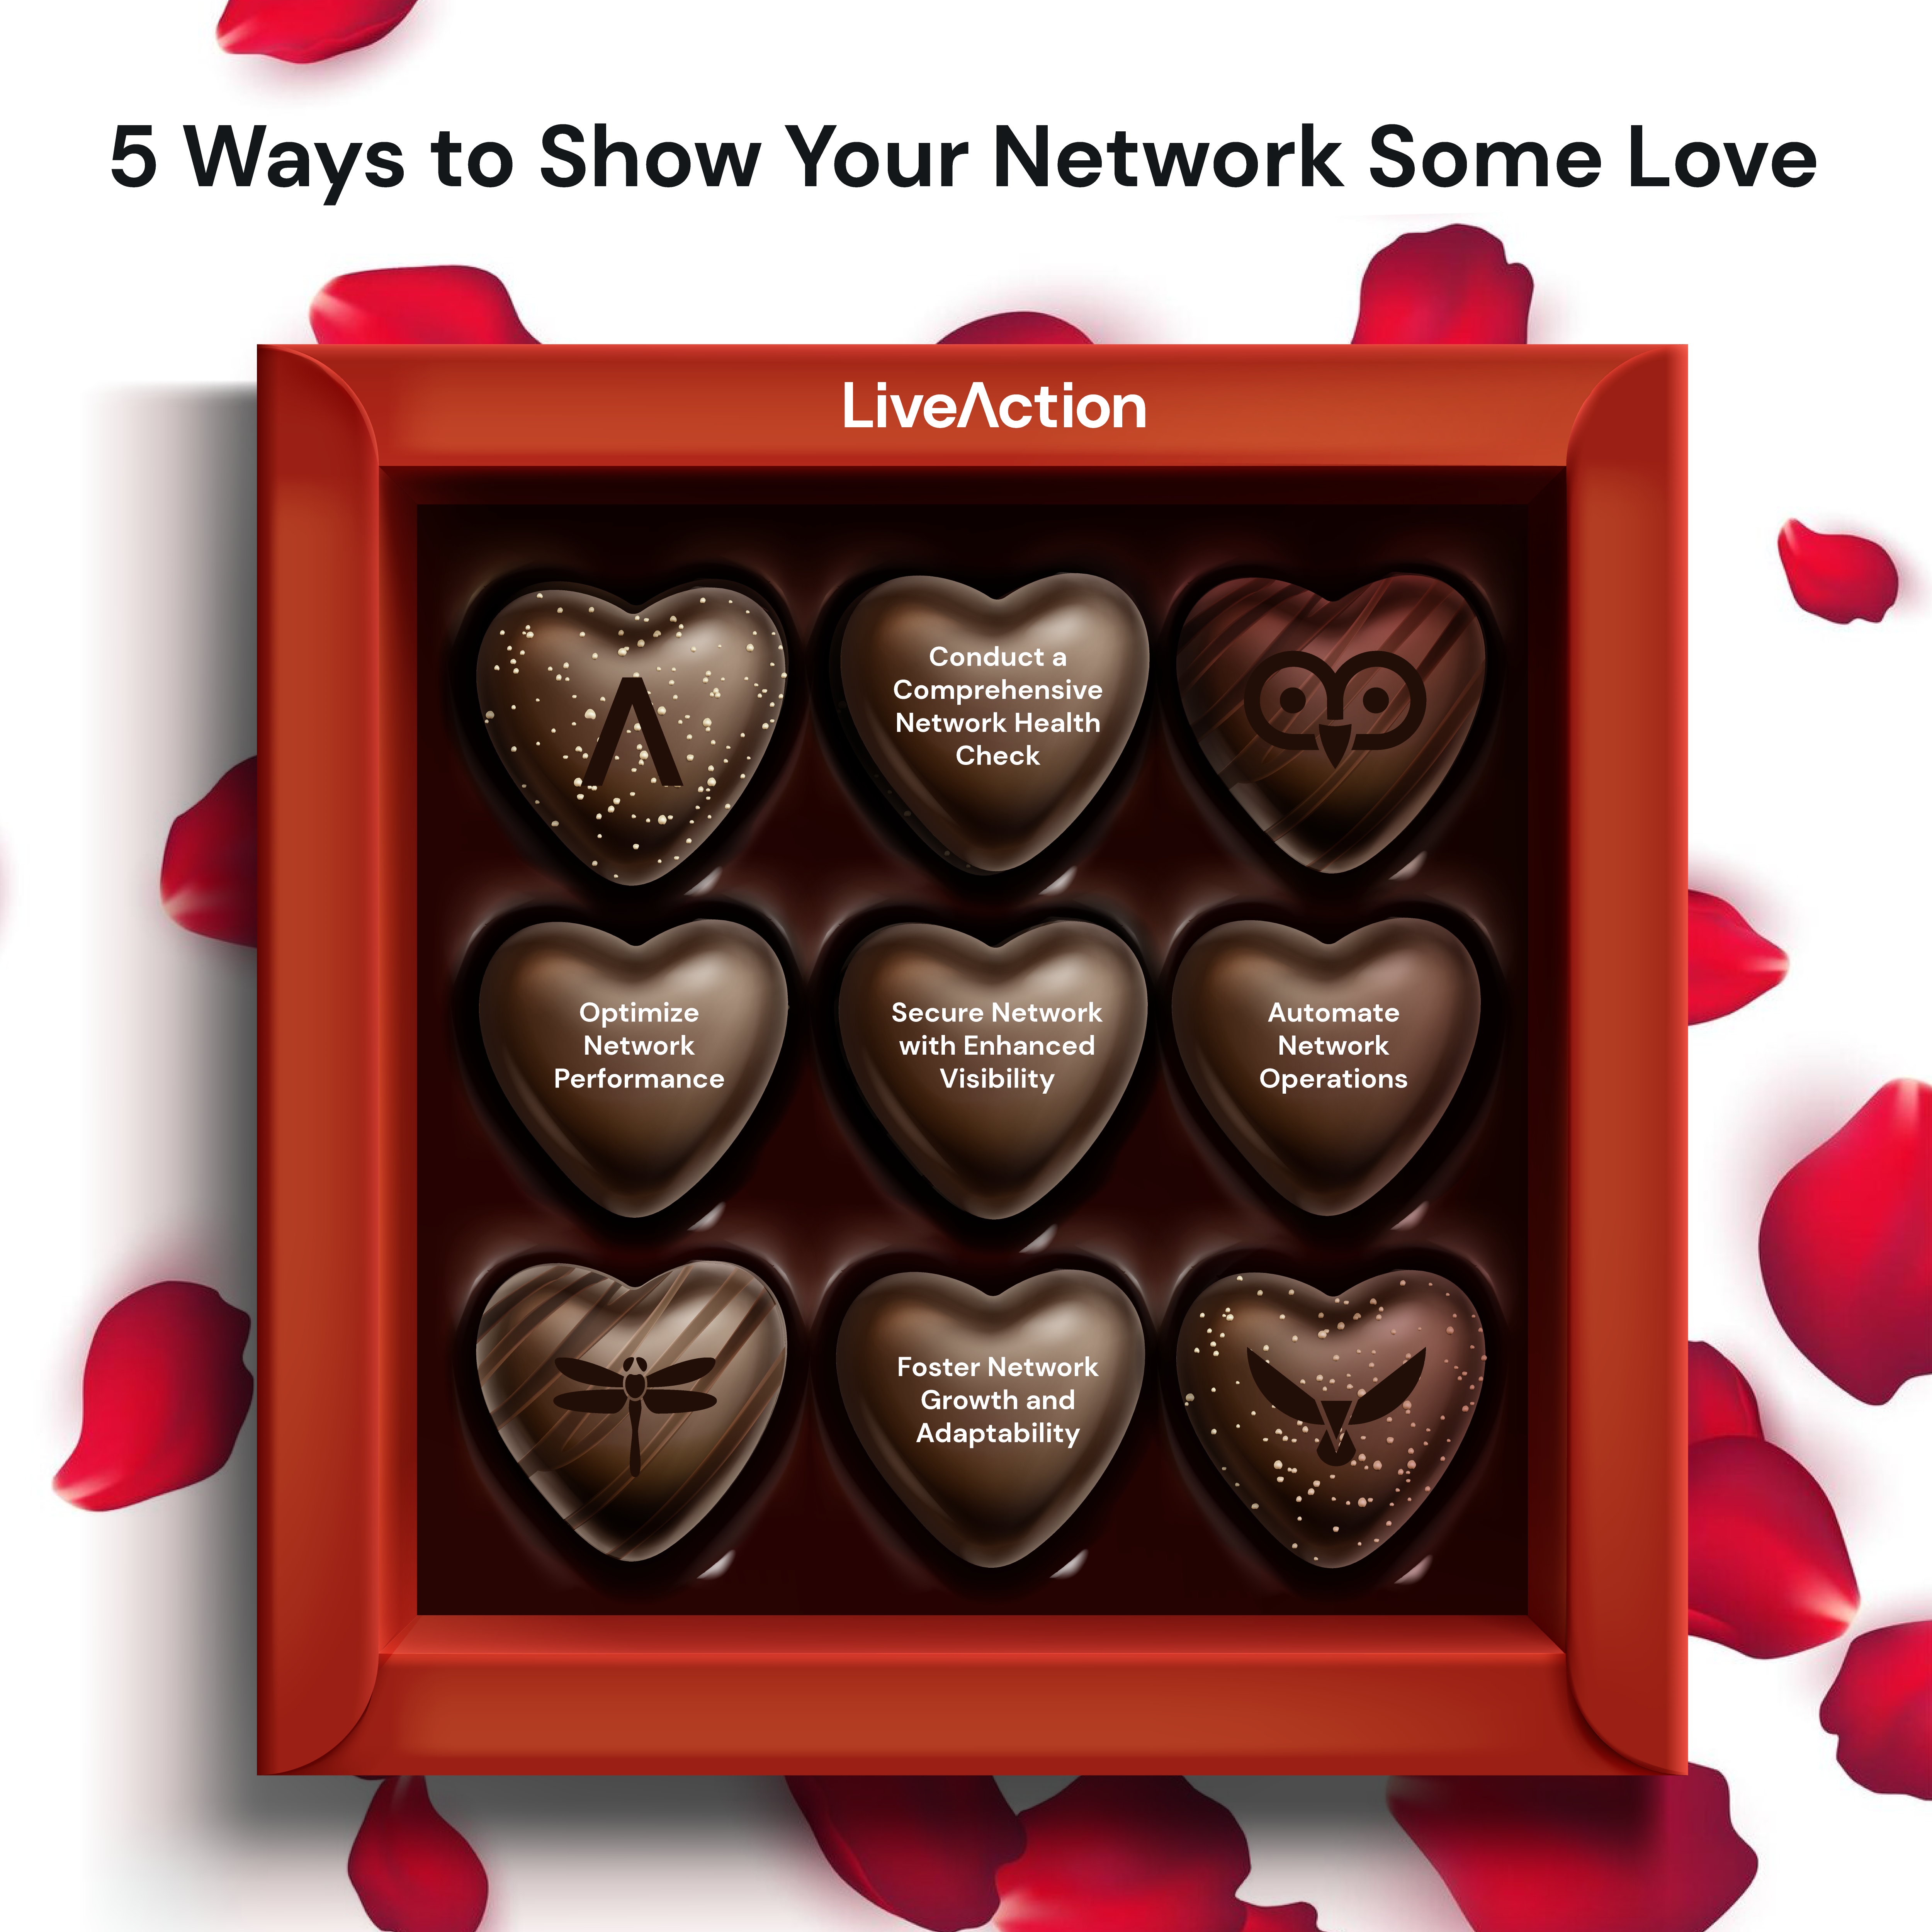 5 Ways to Show Your Network Some Love